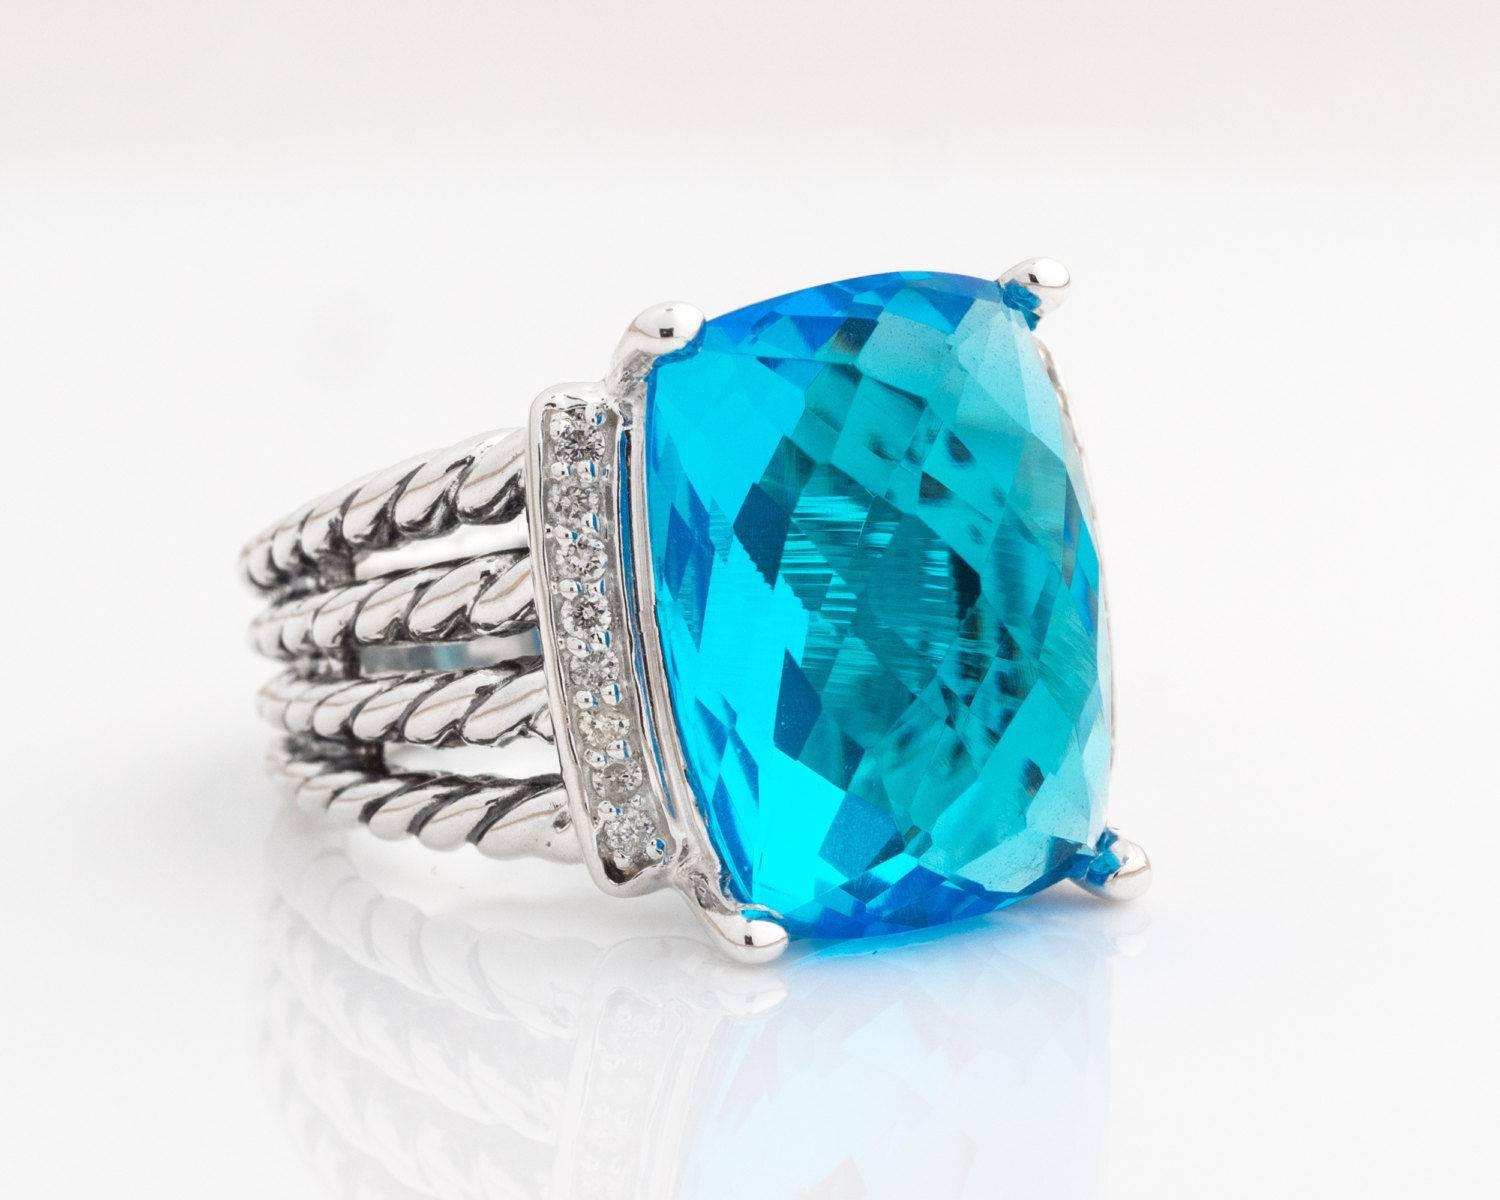 David Yurman Wheaton Ring with Blue Topaz, Diamonds and Sterling Silver

Features a 16 x 12 millimeters Faceted Blue Topaz center stone flanked by one row of Pave Diamonds on each side. The medium blue Topaz is prong set in Sterling Silver. The